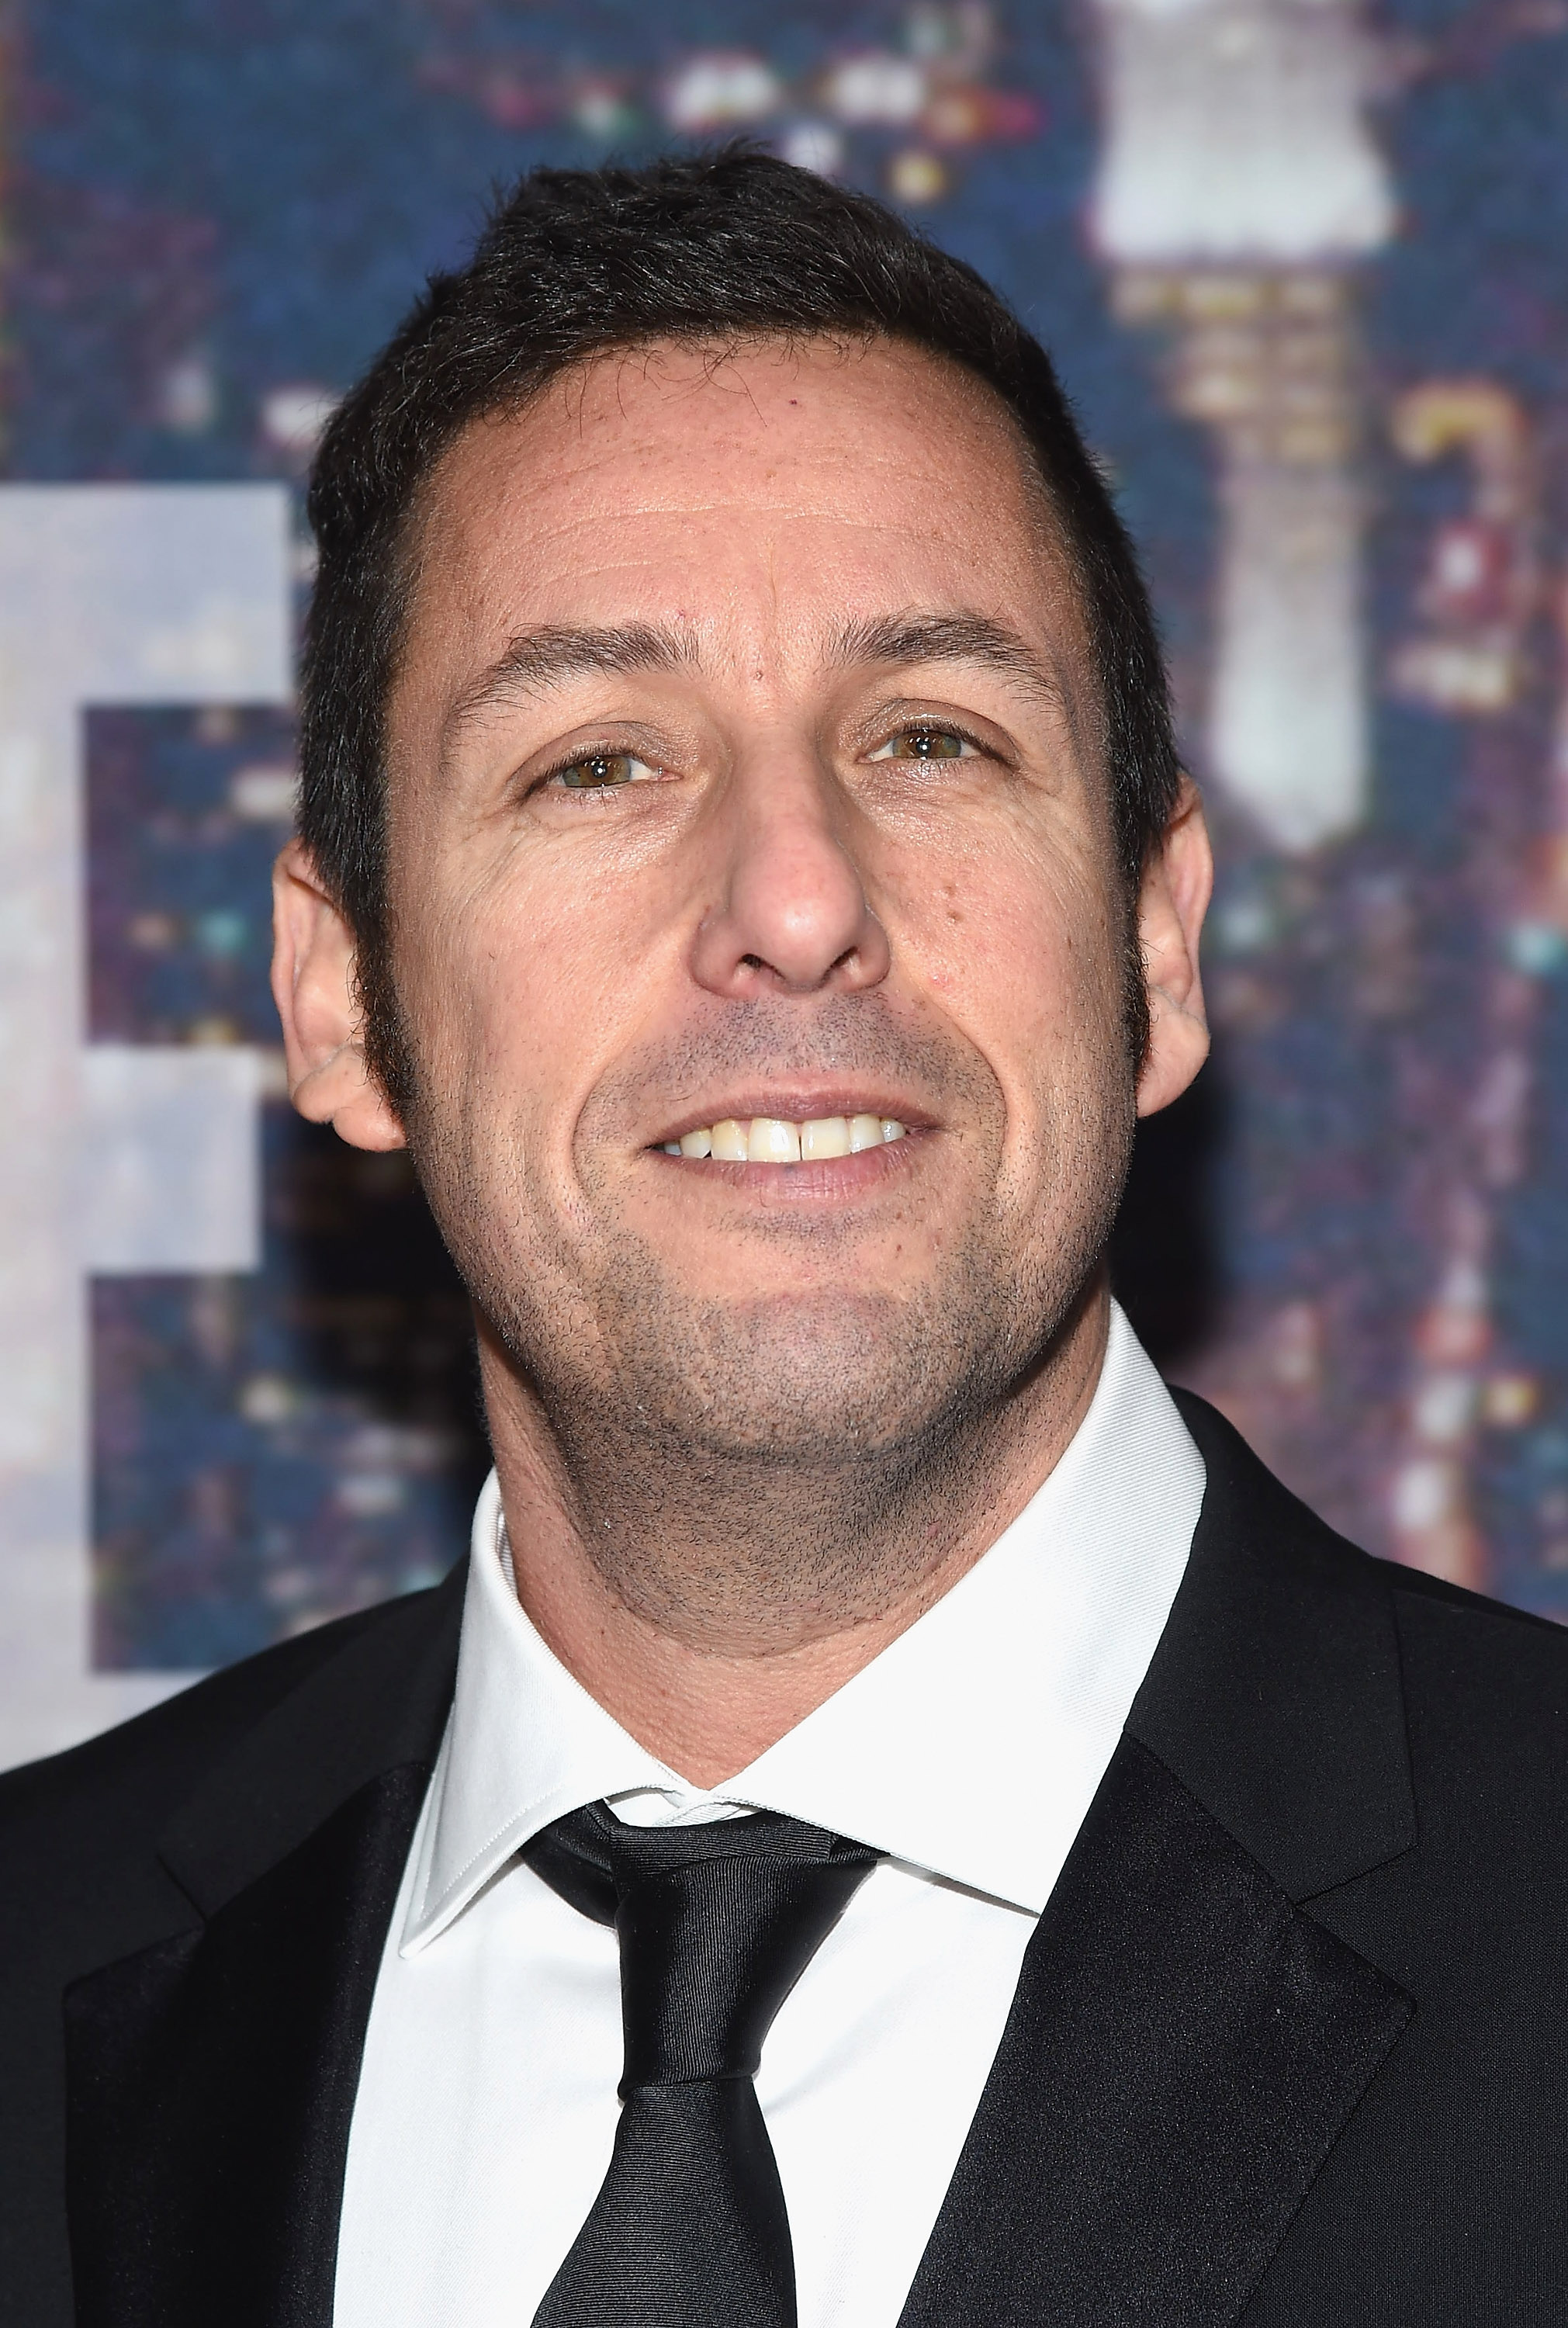 Adam Sandler attends the SNL 40th Anniversary Celebration at Rockefeller Plaza on February 15, 2015 in New York City. (Gary Gershoff—WireImage/Getty Images)